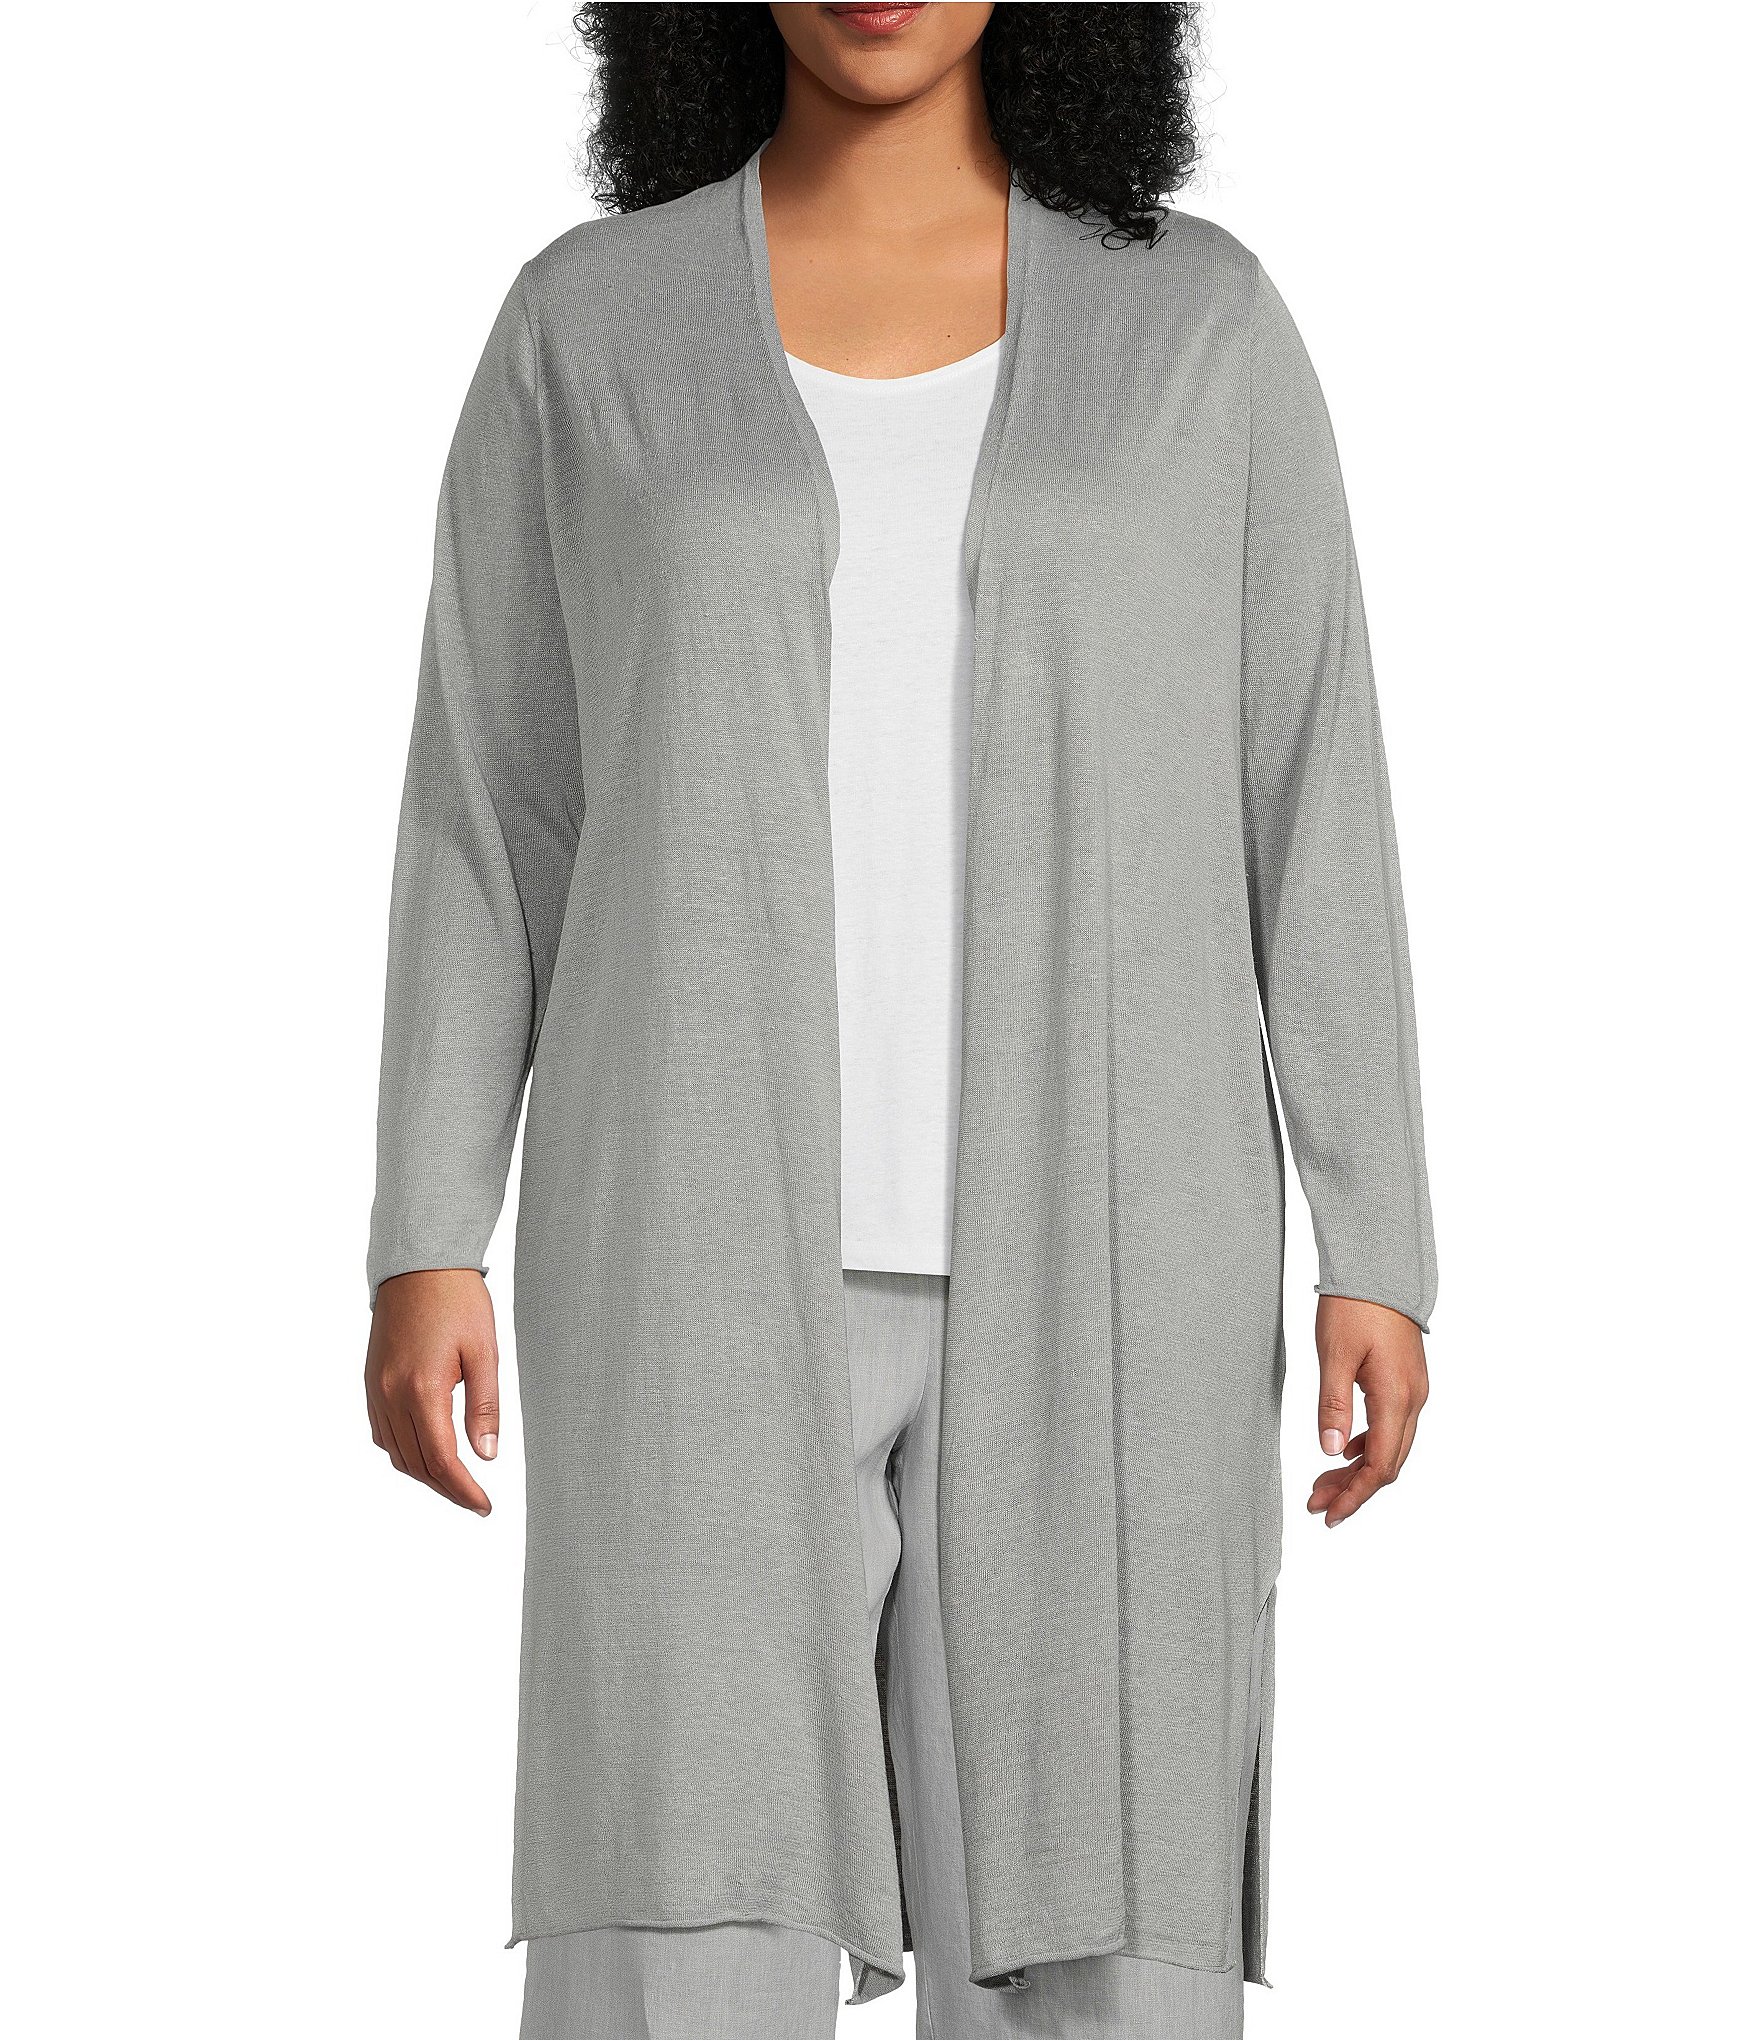  HJJPWW Open Front Maxi Cardiagn for Women Plus Size